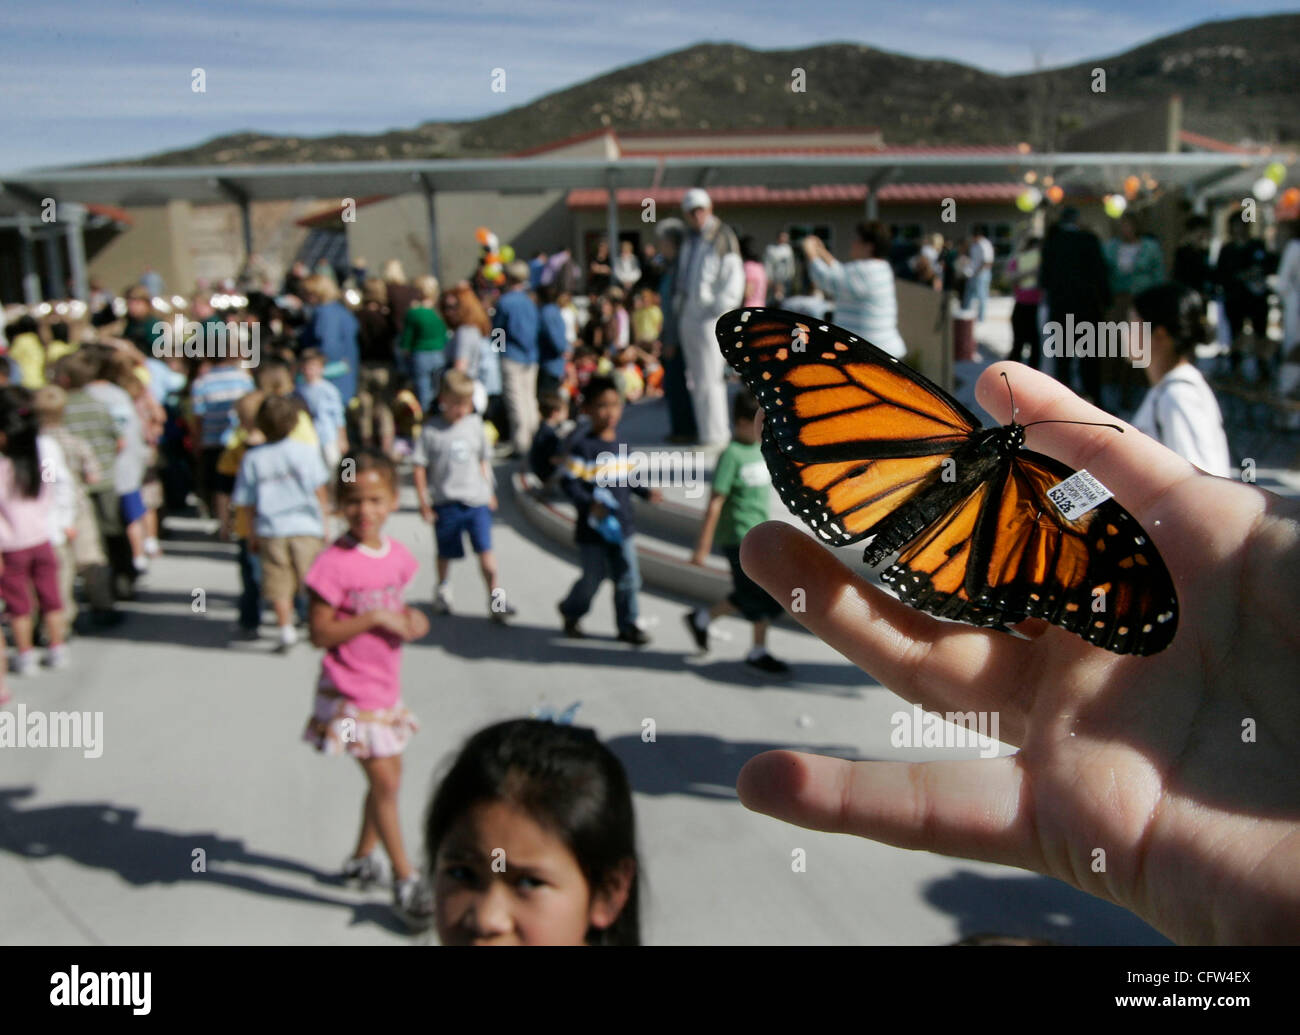 February 5th, 2006, 4SRanch, California, USA. A tagged Monarch butterfly prepares to flyaway after an dedication ceremony at Monterey Ridge Elementary School on Monday. The Monarchs which are the school's mascot, were released at the end of the ceremony dedicating the new school.  Mandatory Credit:  Stock Photo